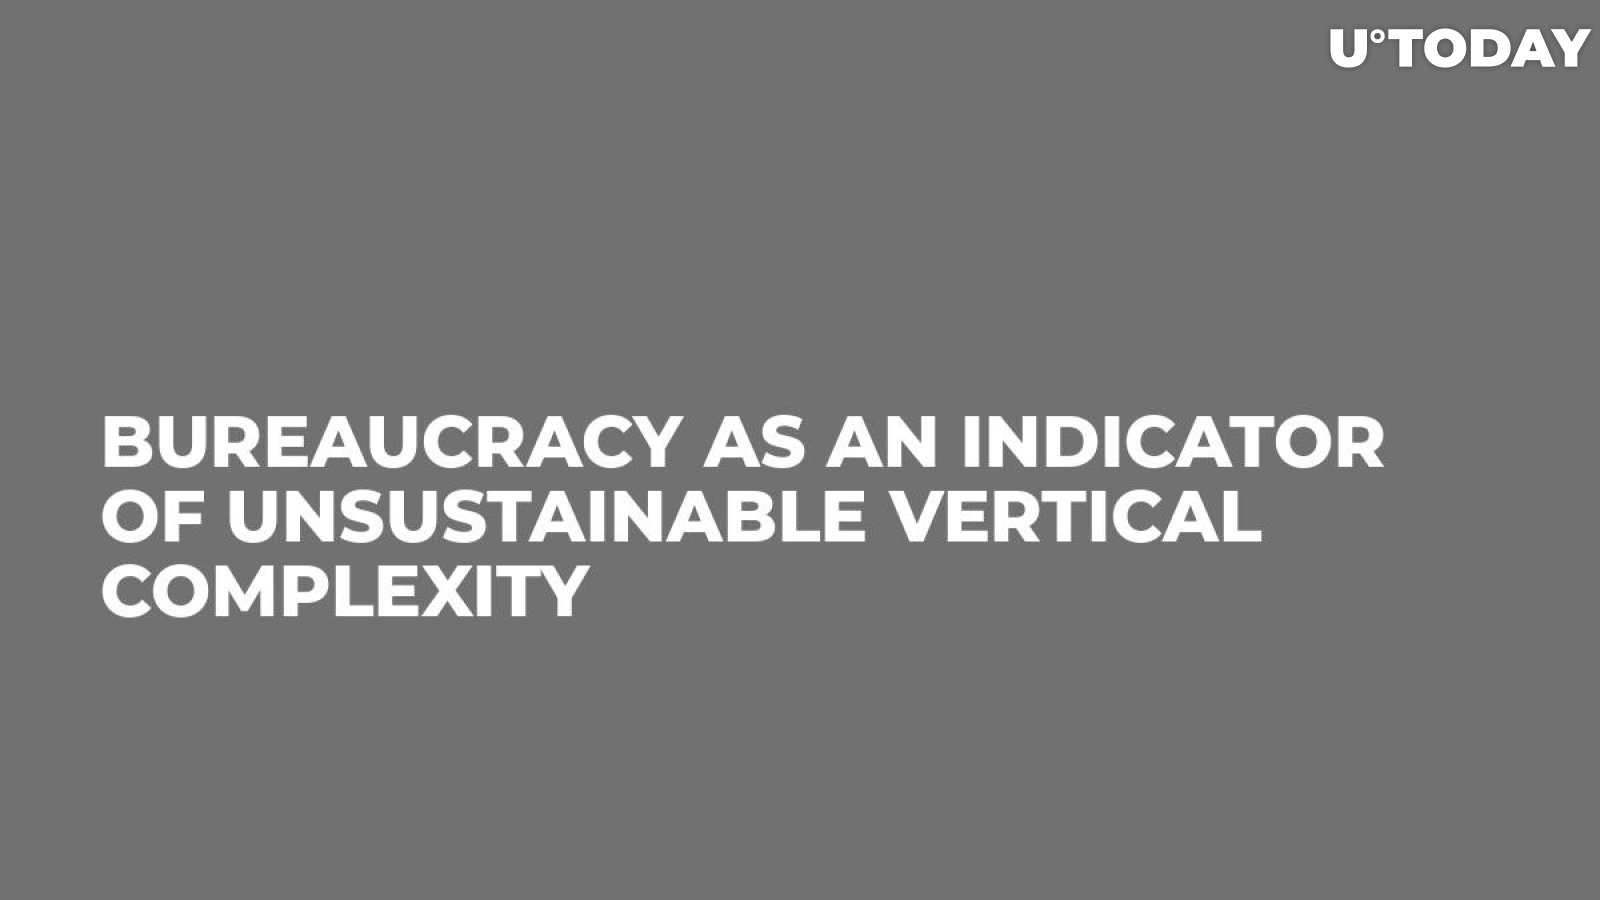 Bureaucracy as an Indicator of Unsustainable Vertical Complexity